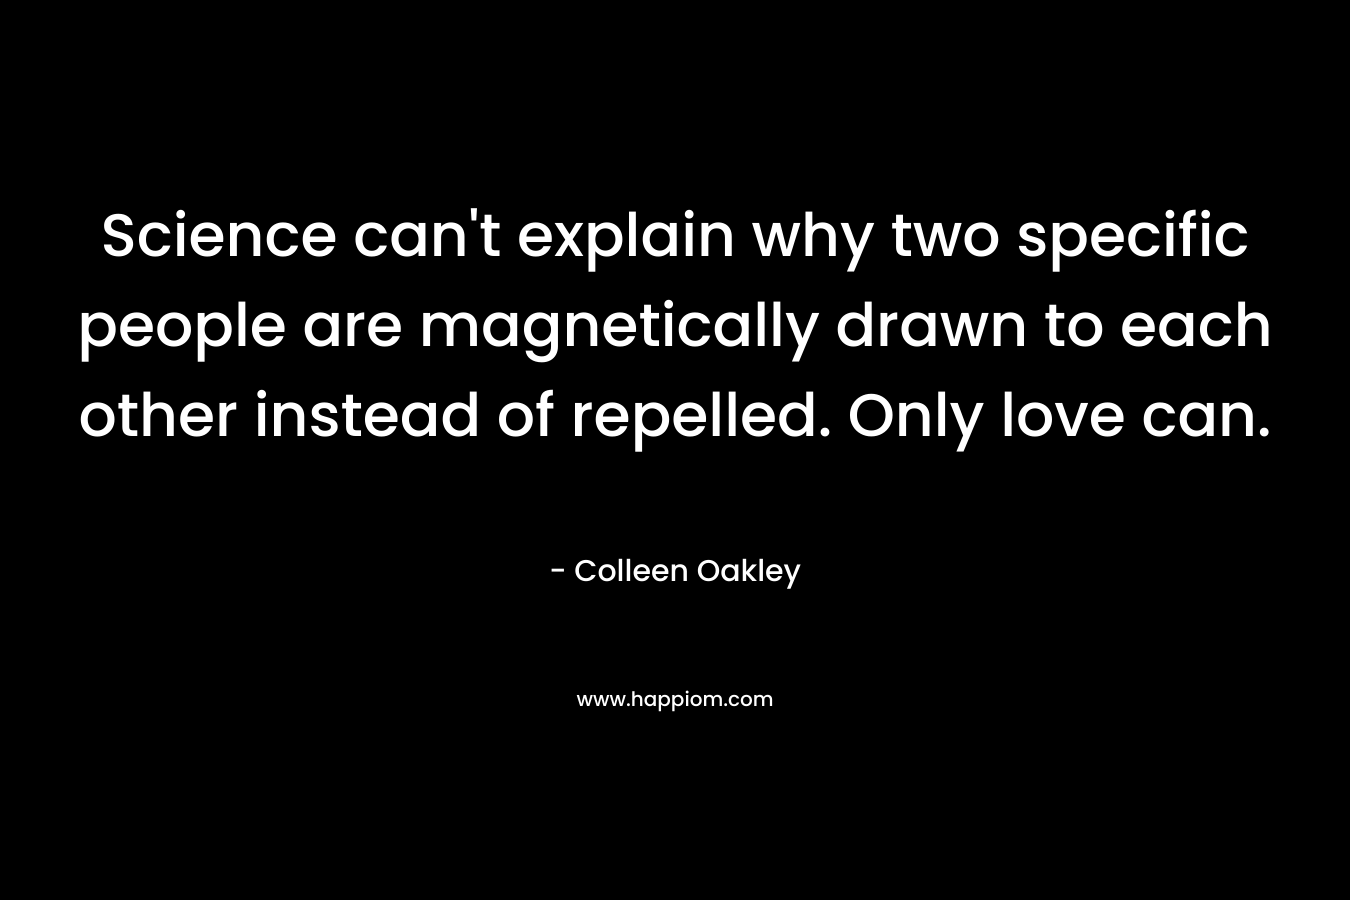 Science can’t explain why two specific people are magnetically drawn to each other instead of repelled. Only love can. – Colleen Oakley